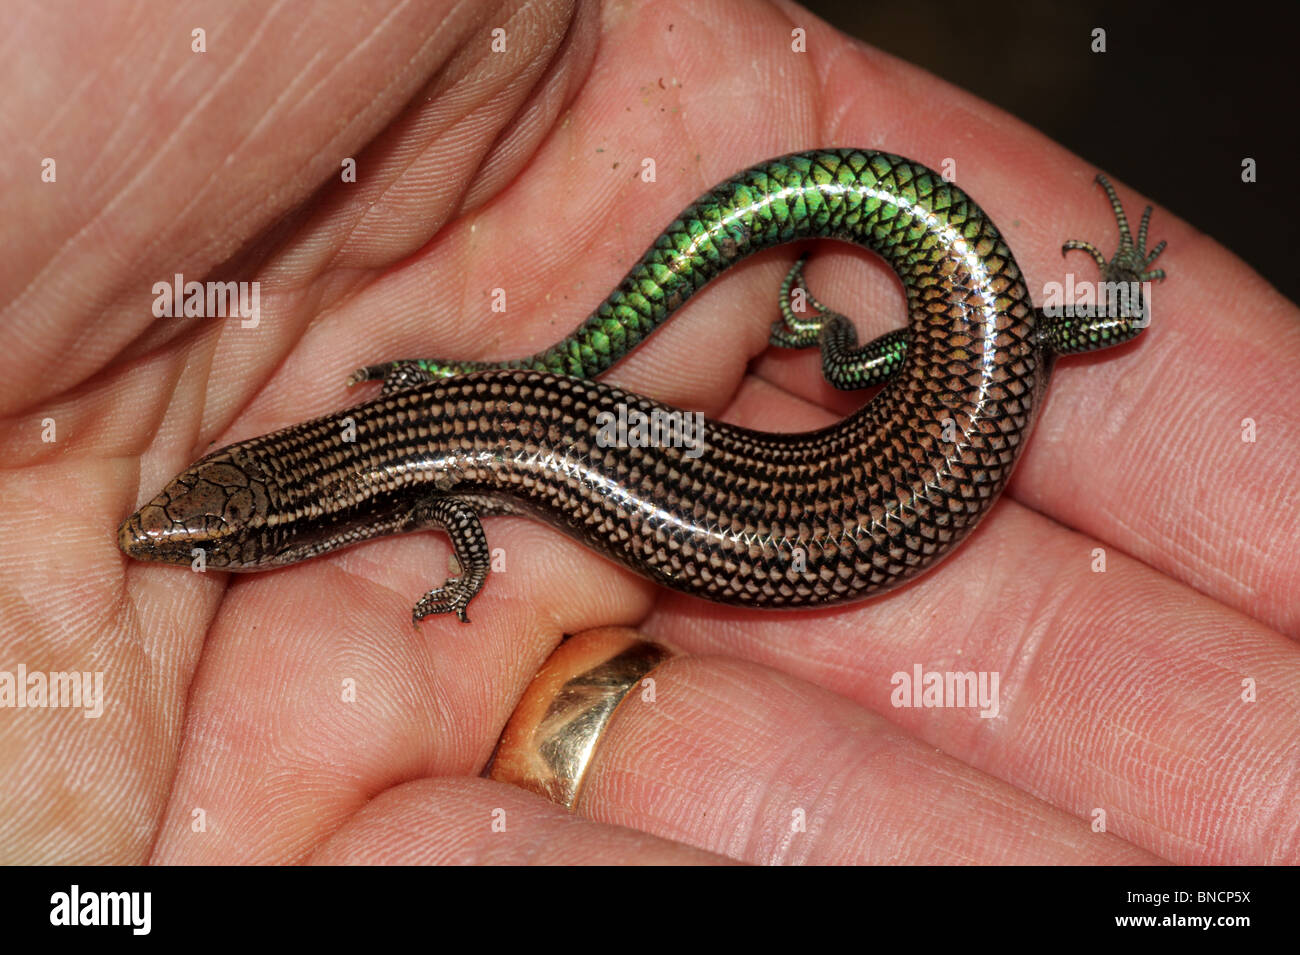 Gran Canaria Skink - Chalcides sexlineatus Stock Photo